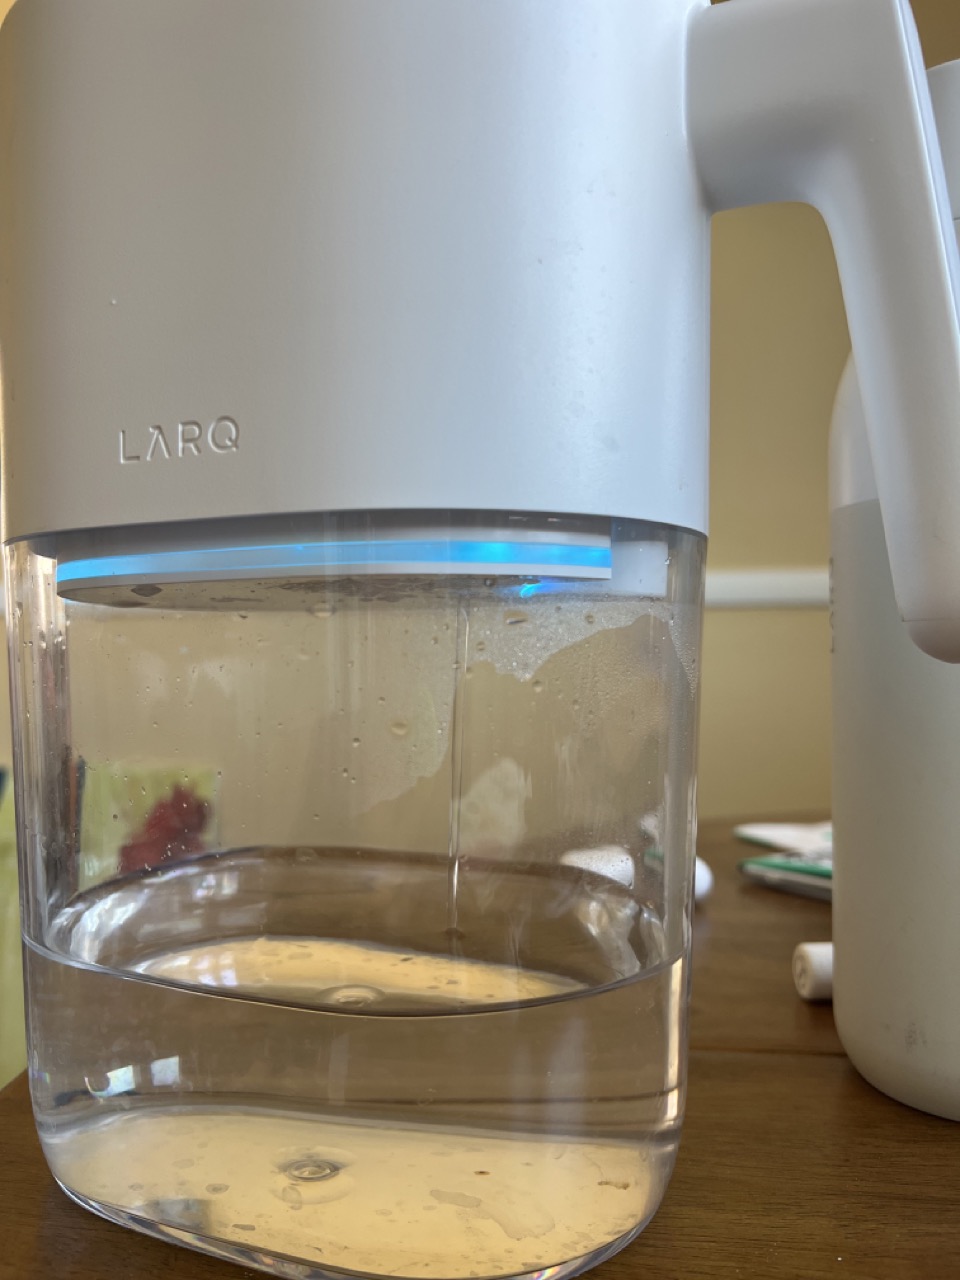 The LARQ pitcher with water in it.